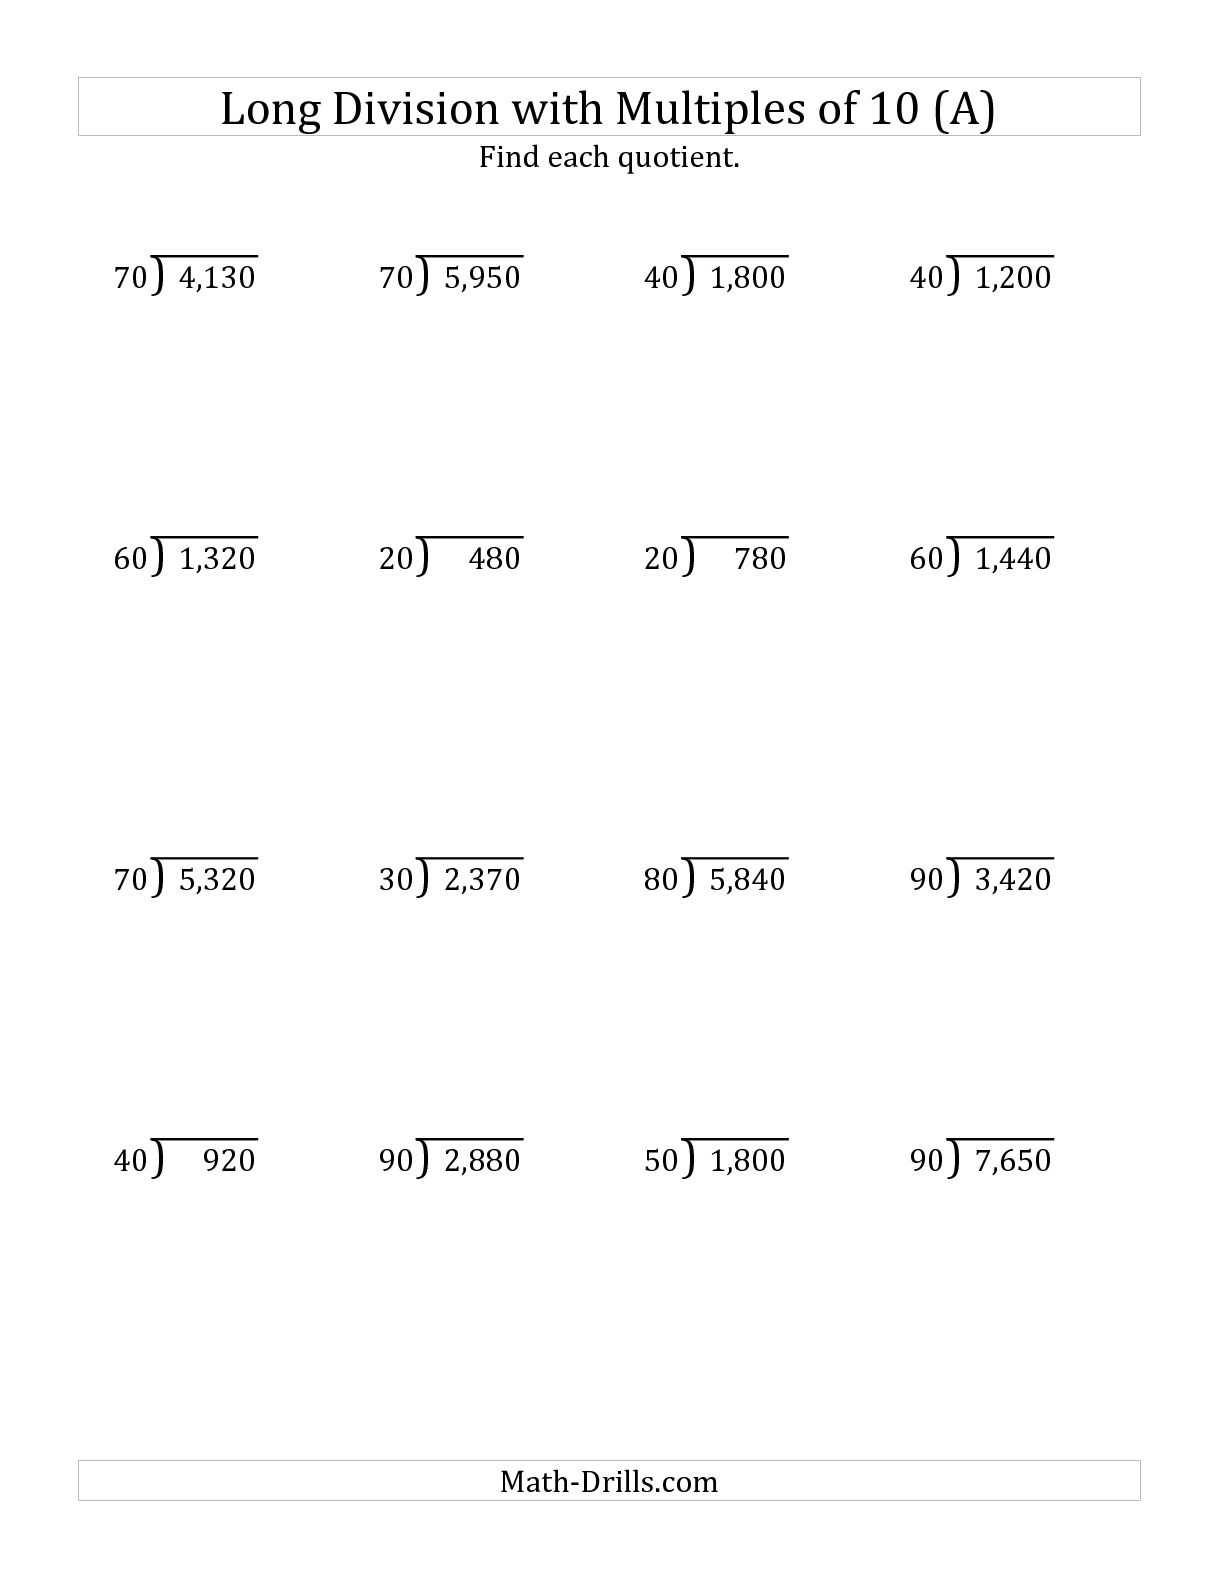 Long Division with Remainders Worksheets Image